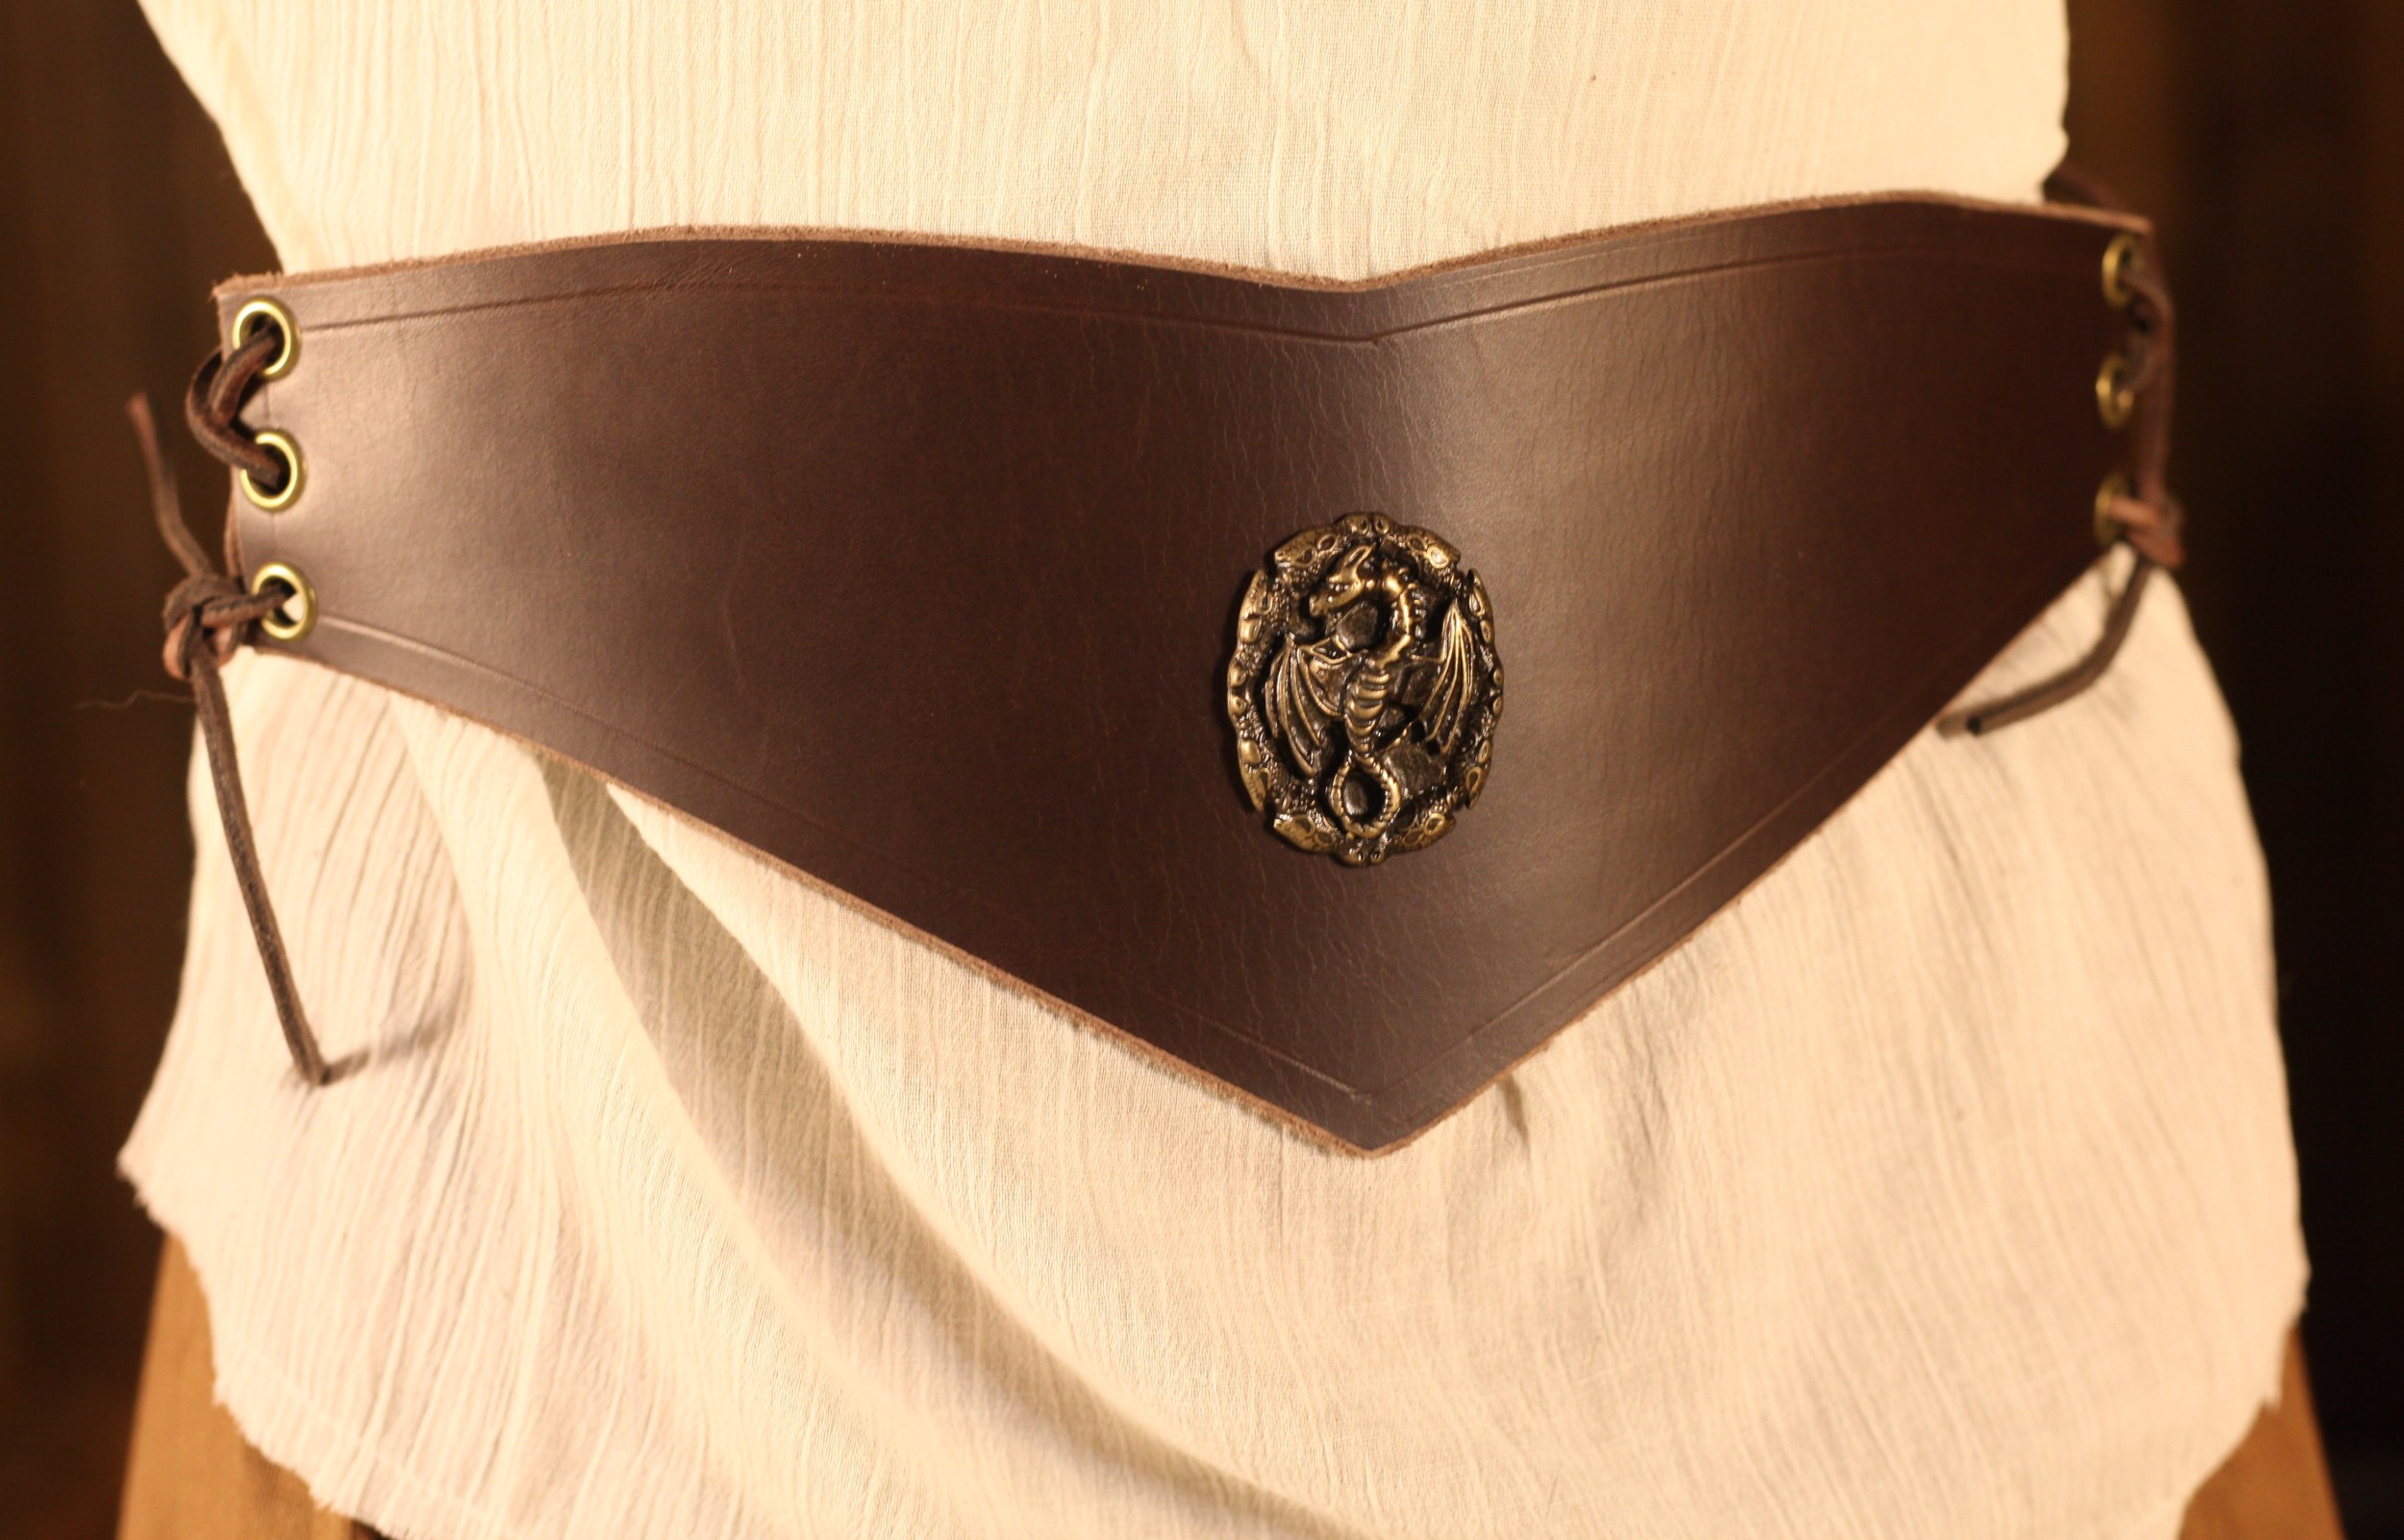 The medieval belt in black or brown leather